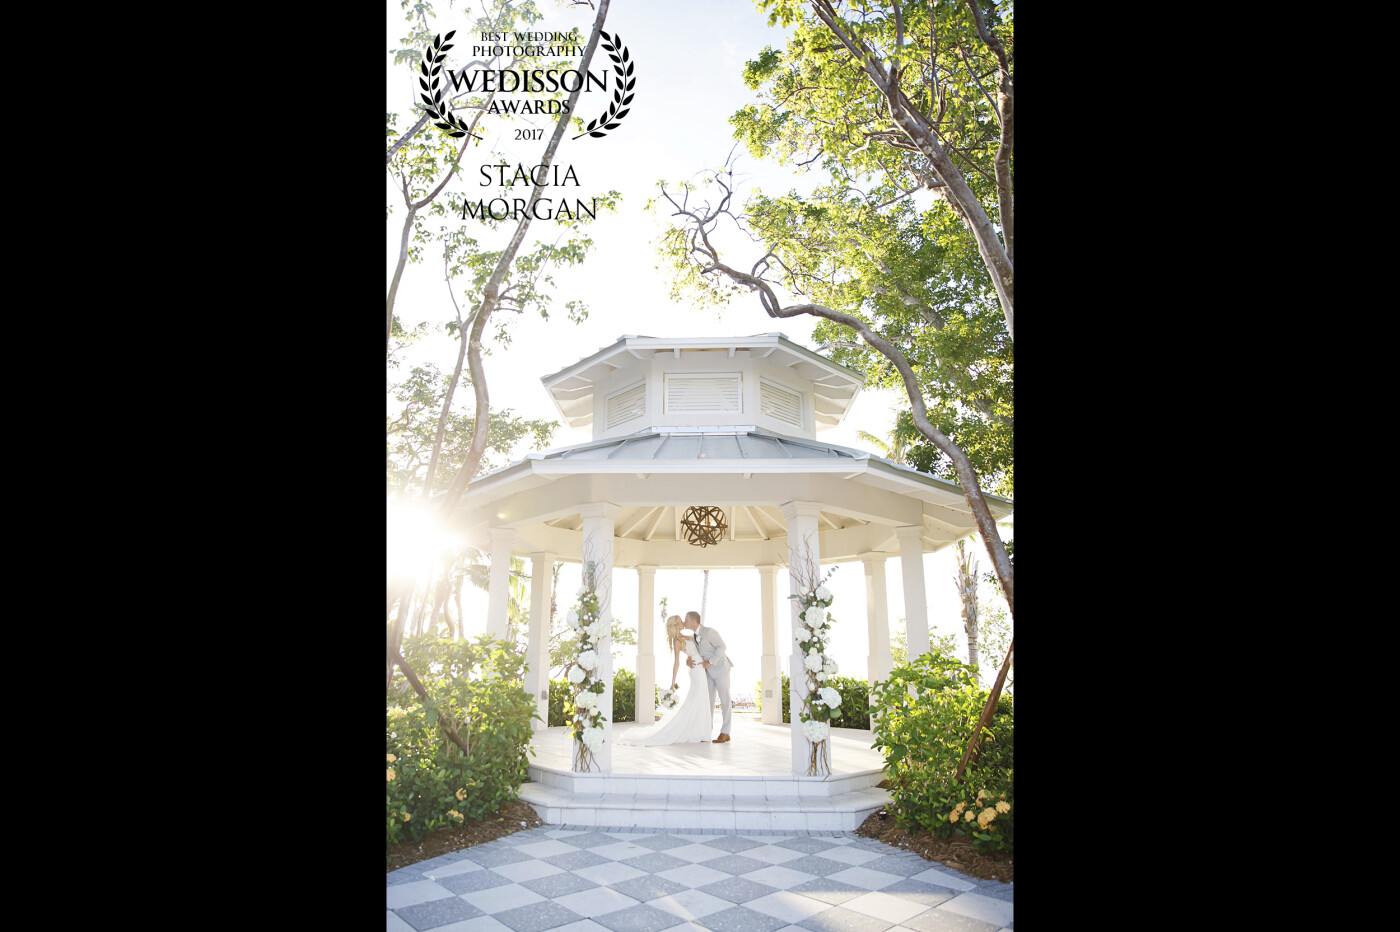  Lindsey & Matt said I do at one of my favorite resorts in Key Largo, Playa Largo Resort. This photo was taken just after they wed inside the gazebo where their vows were spoken. I thought it would be a beautiful symbol of the promise they made to one another. 